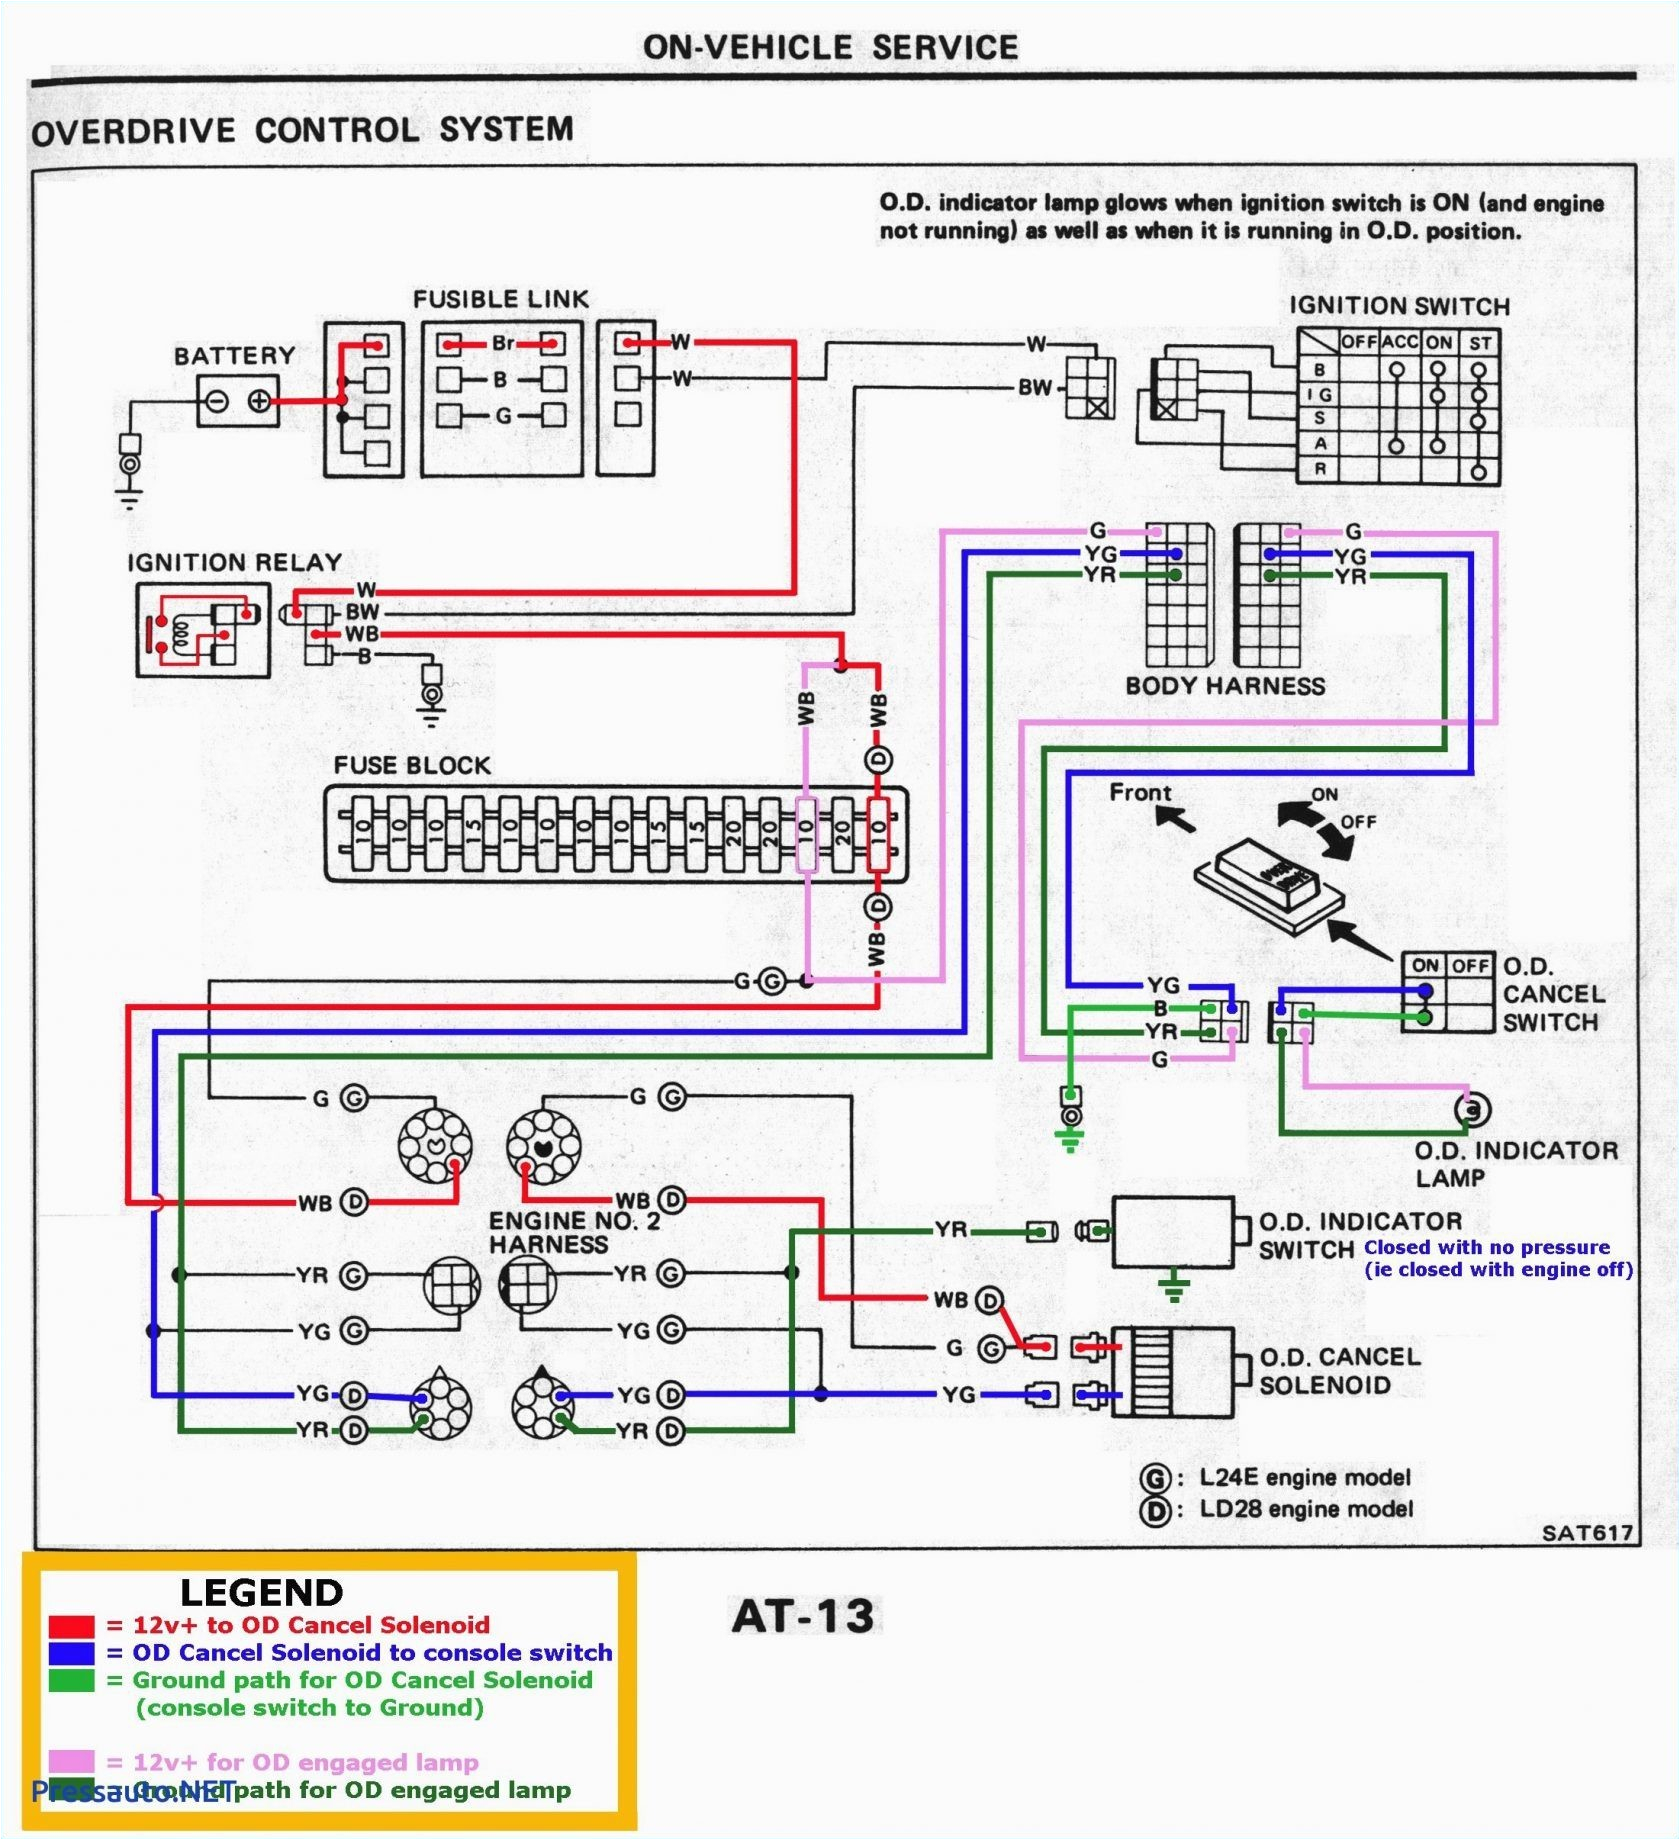 wiring diagram for 2009 nissan altima wiring diagram 2008 nissan altima wiring harness 2009 nissan altima